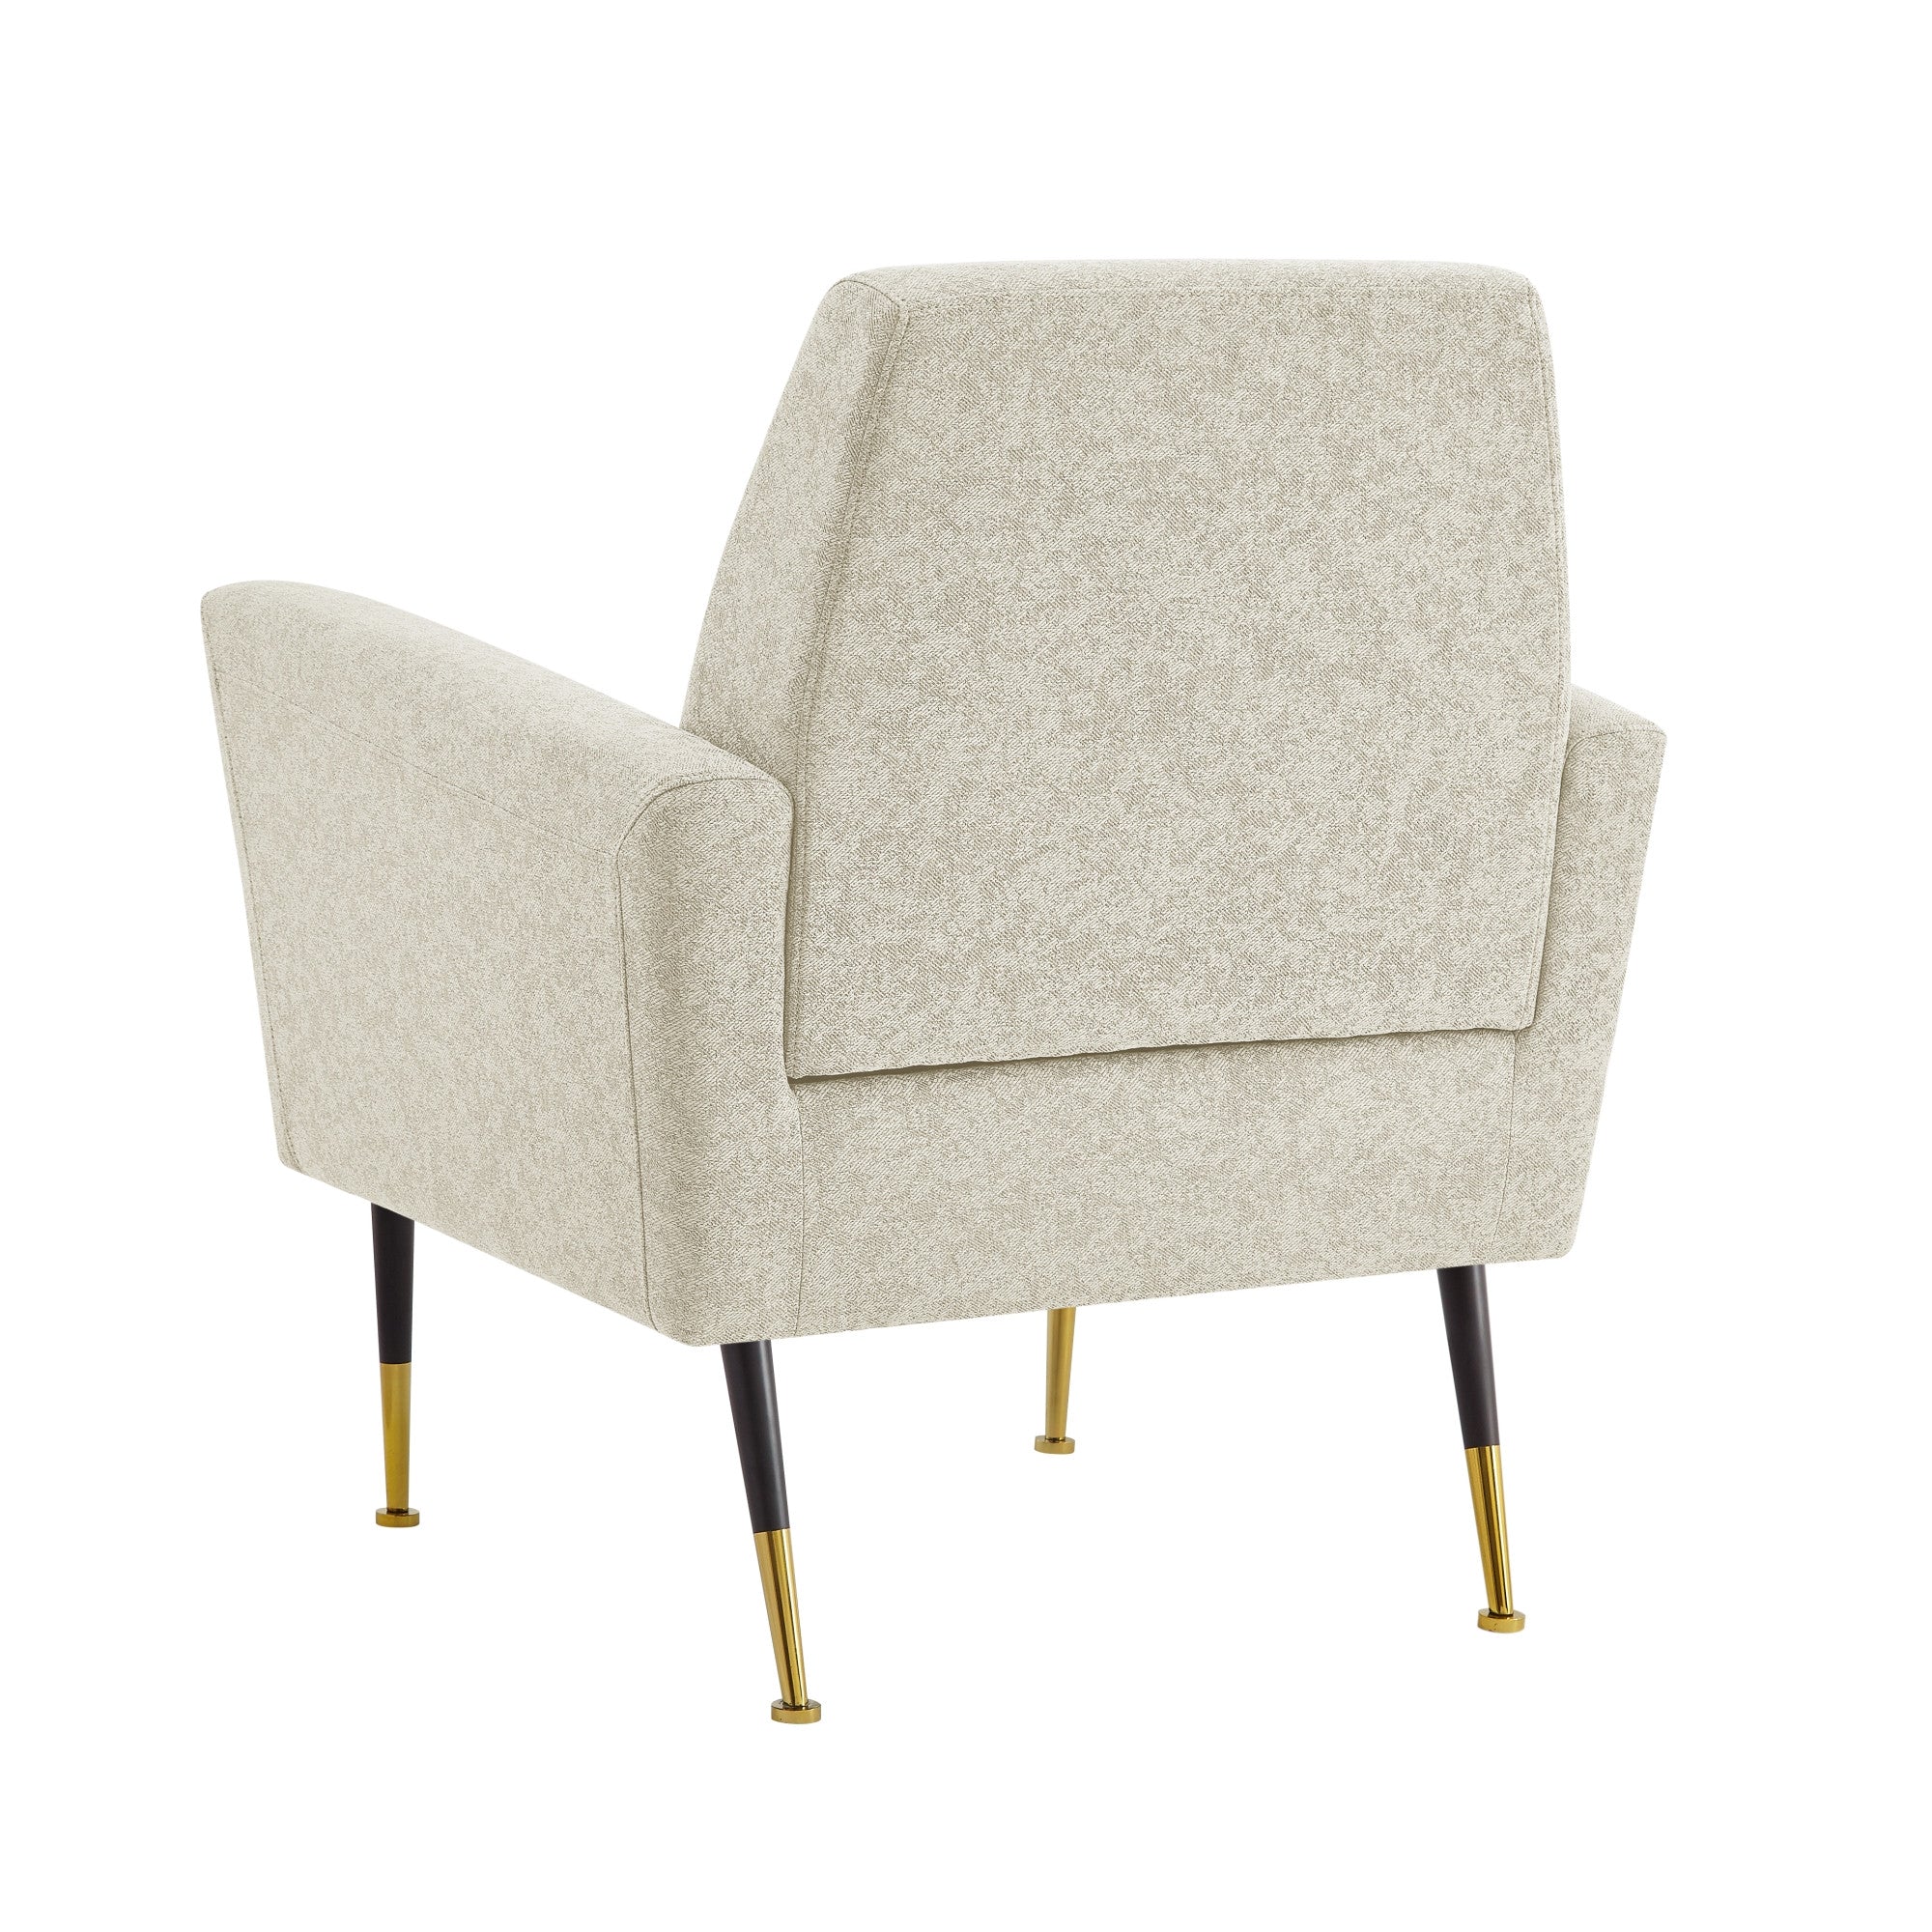 32" Dark Gray And Gold Linen Arm Chair